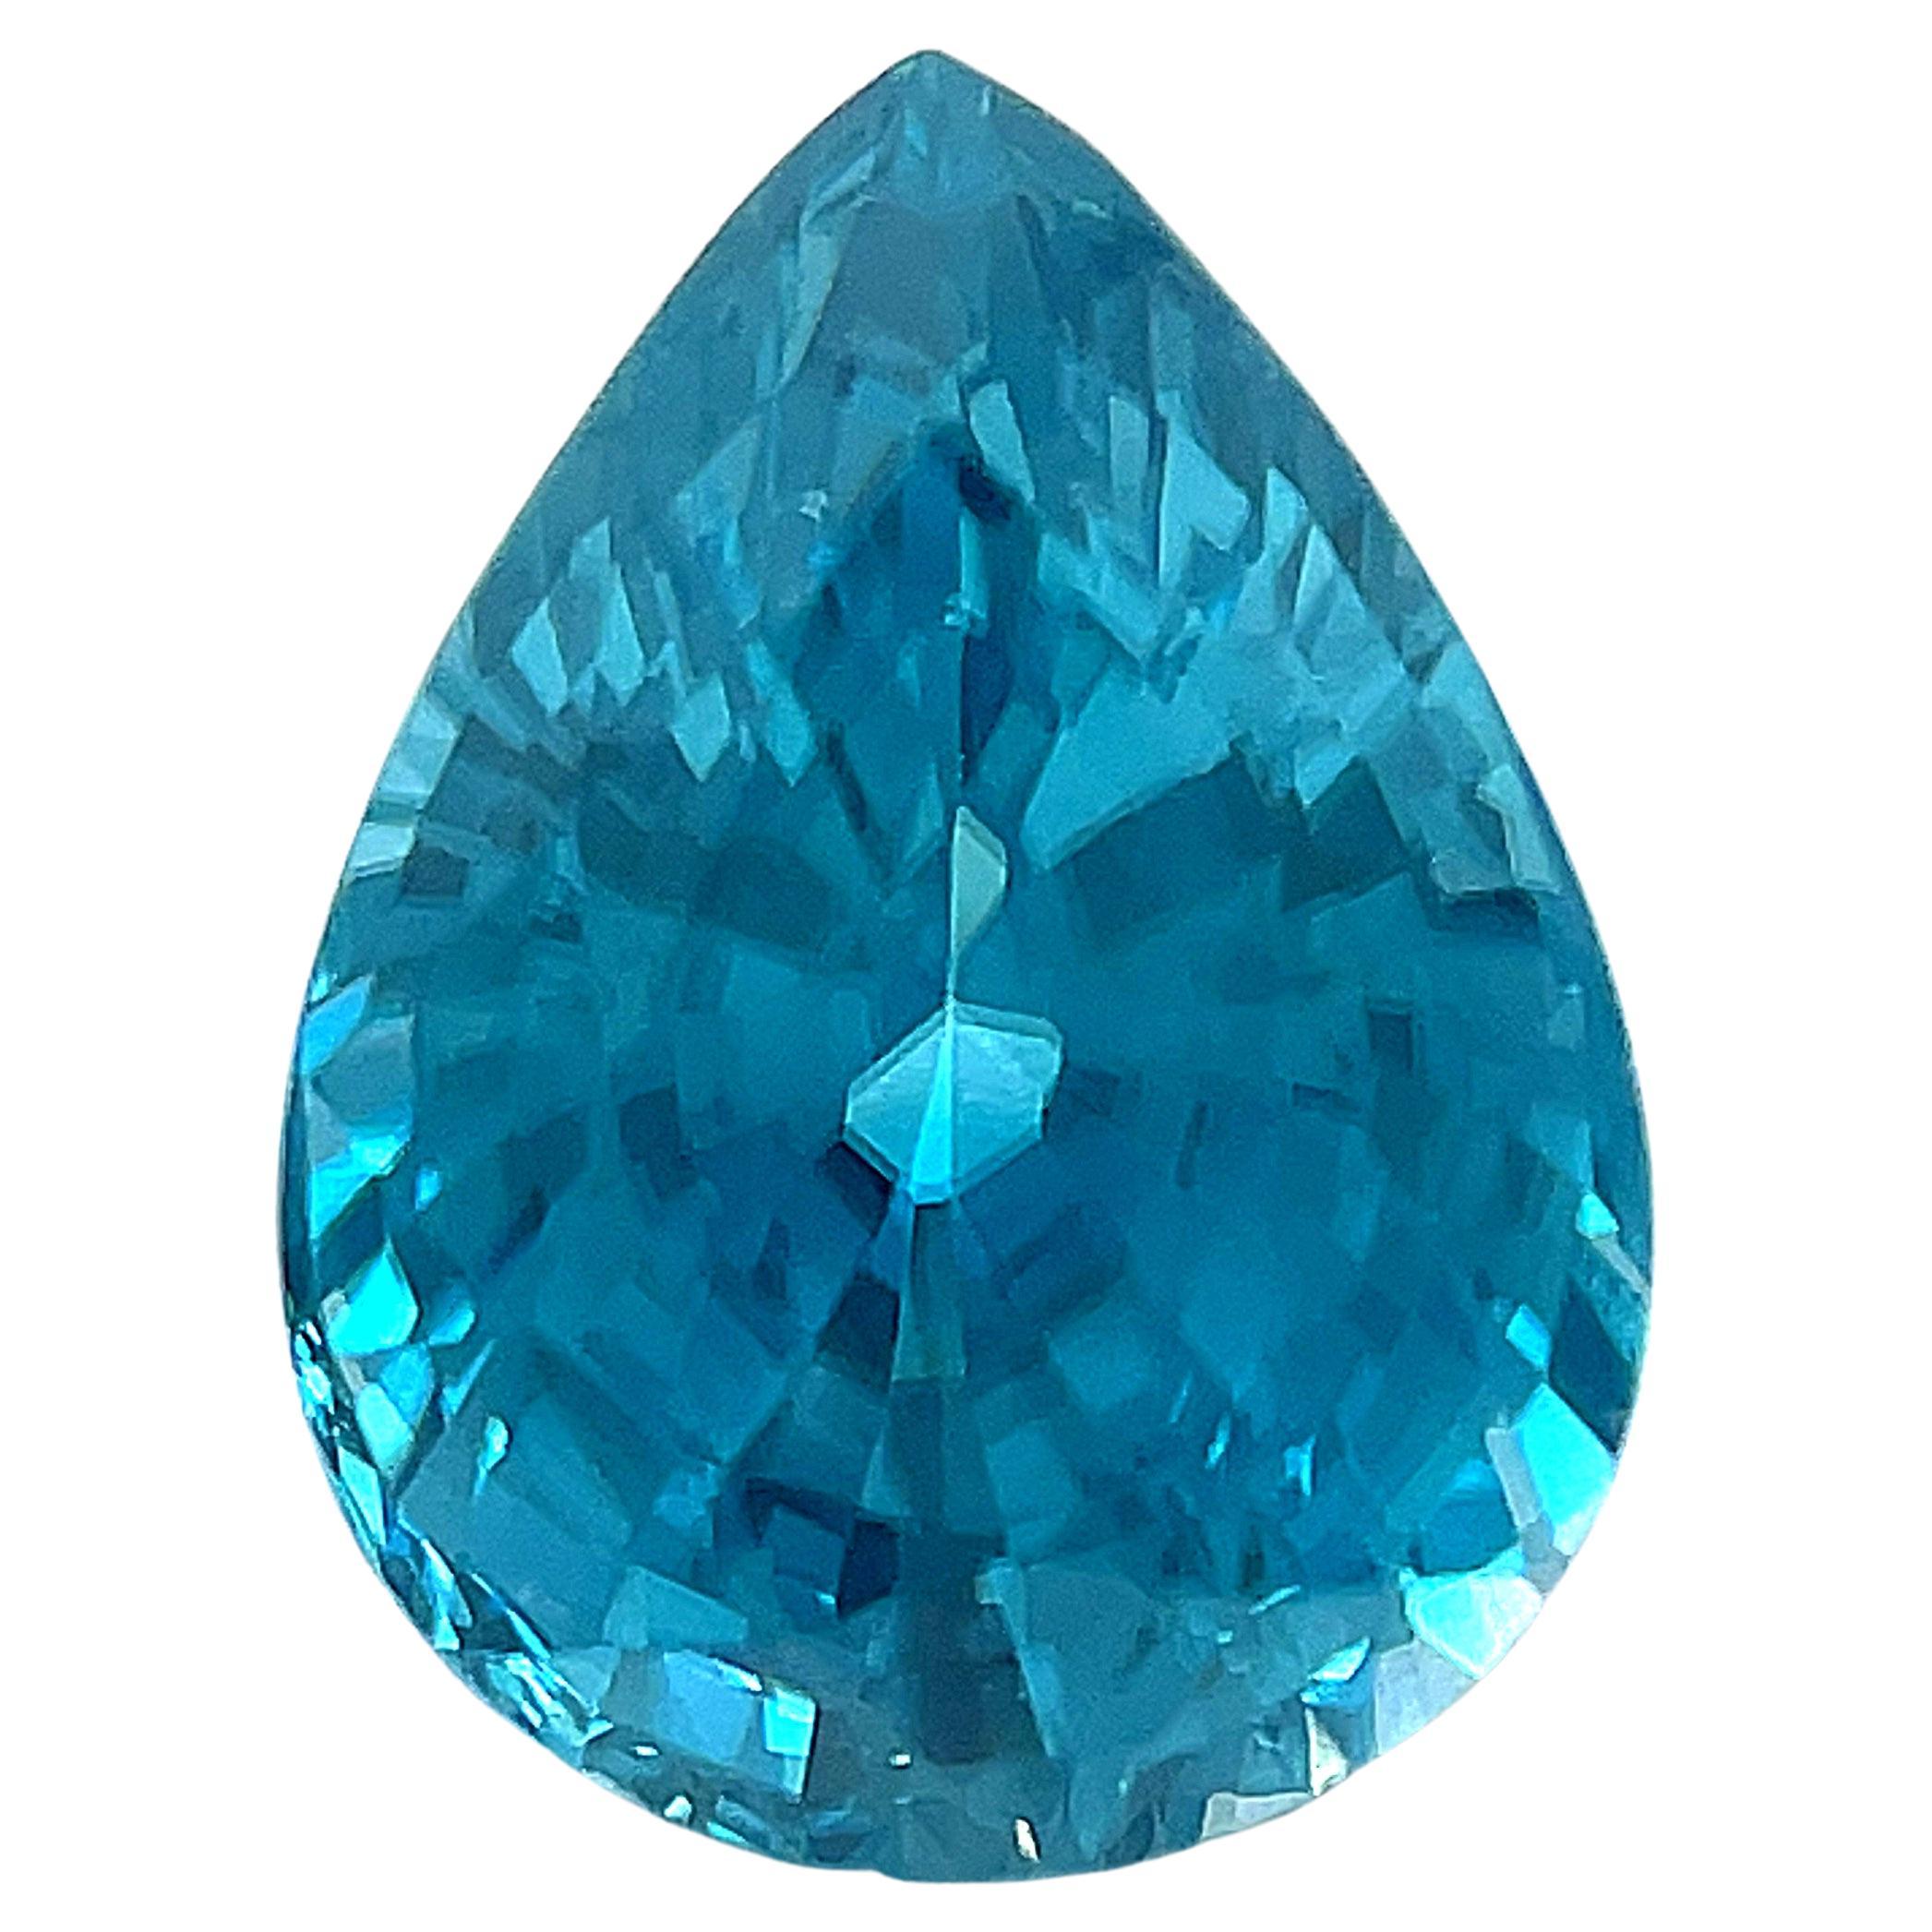 4.72 Carat Pear Shaped Blue Zircon, Unset Loose Gemstone  For Sale